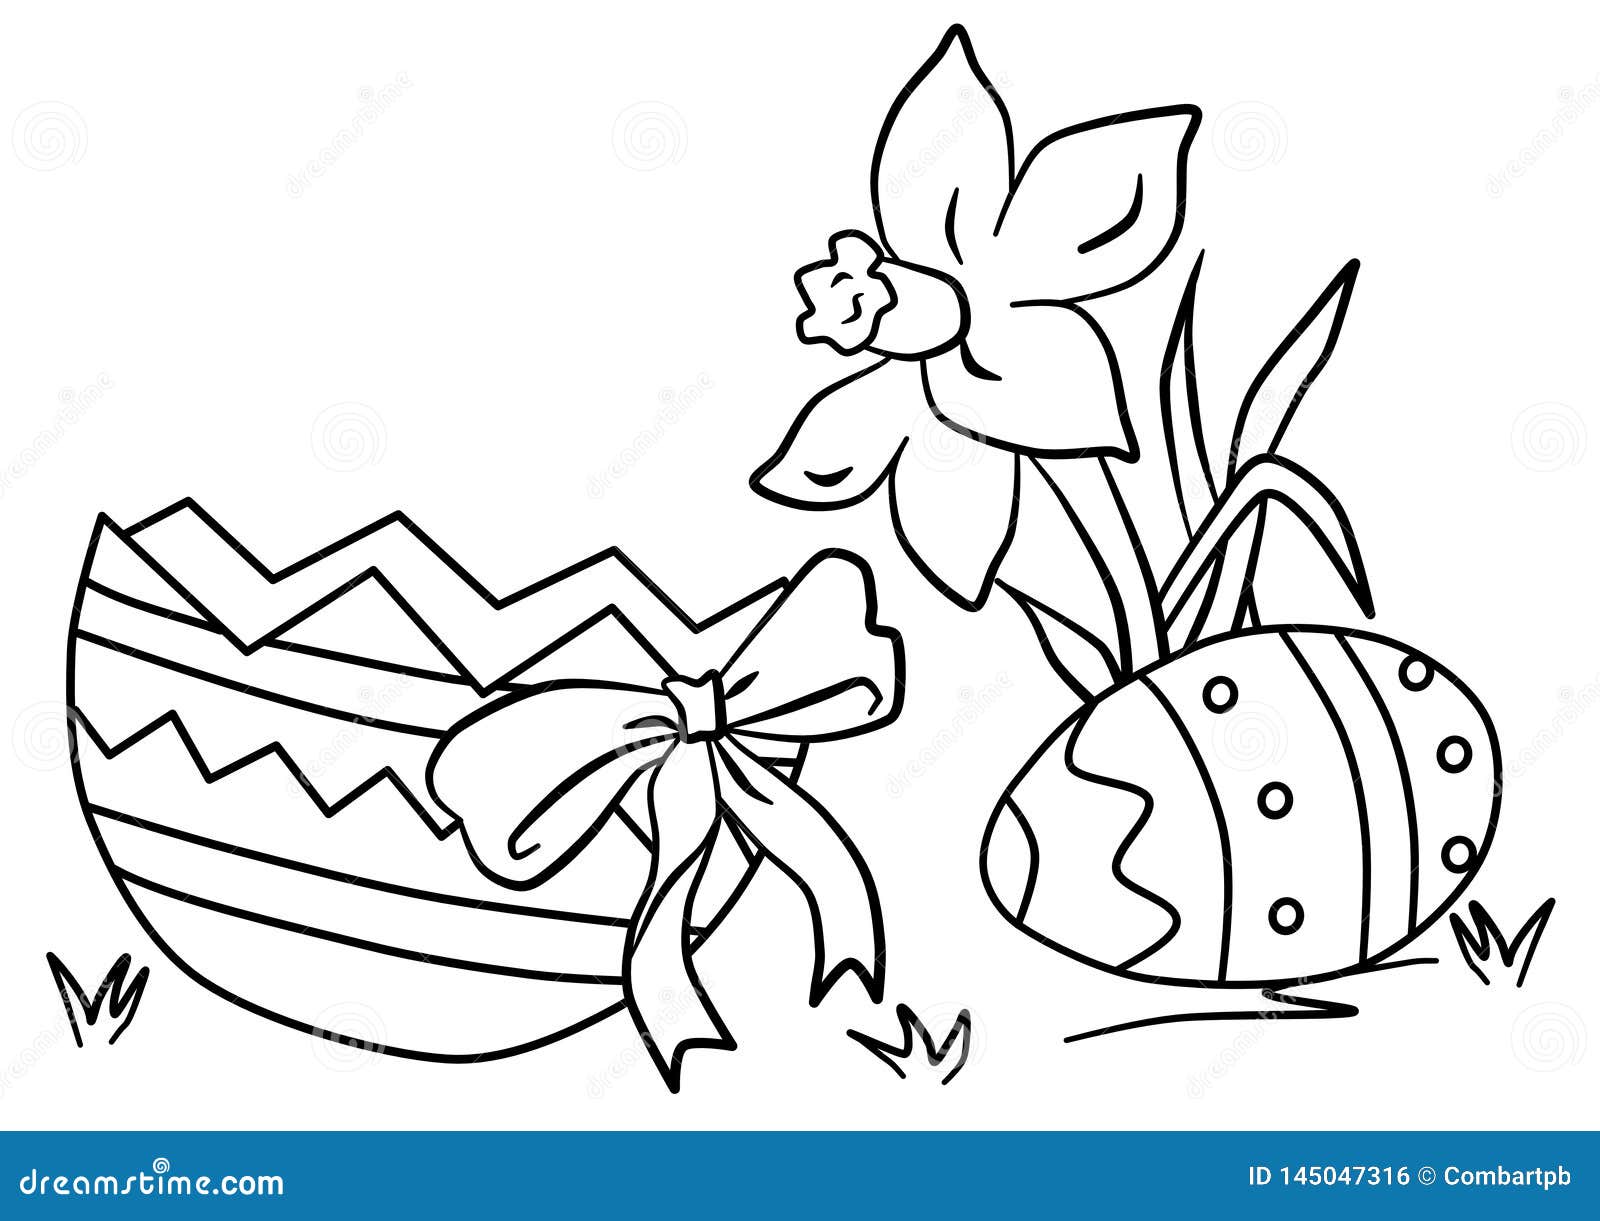 Download Colouring Of Daffodil, Egg Shell With Bow Stock Vector ...